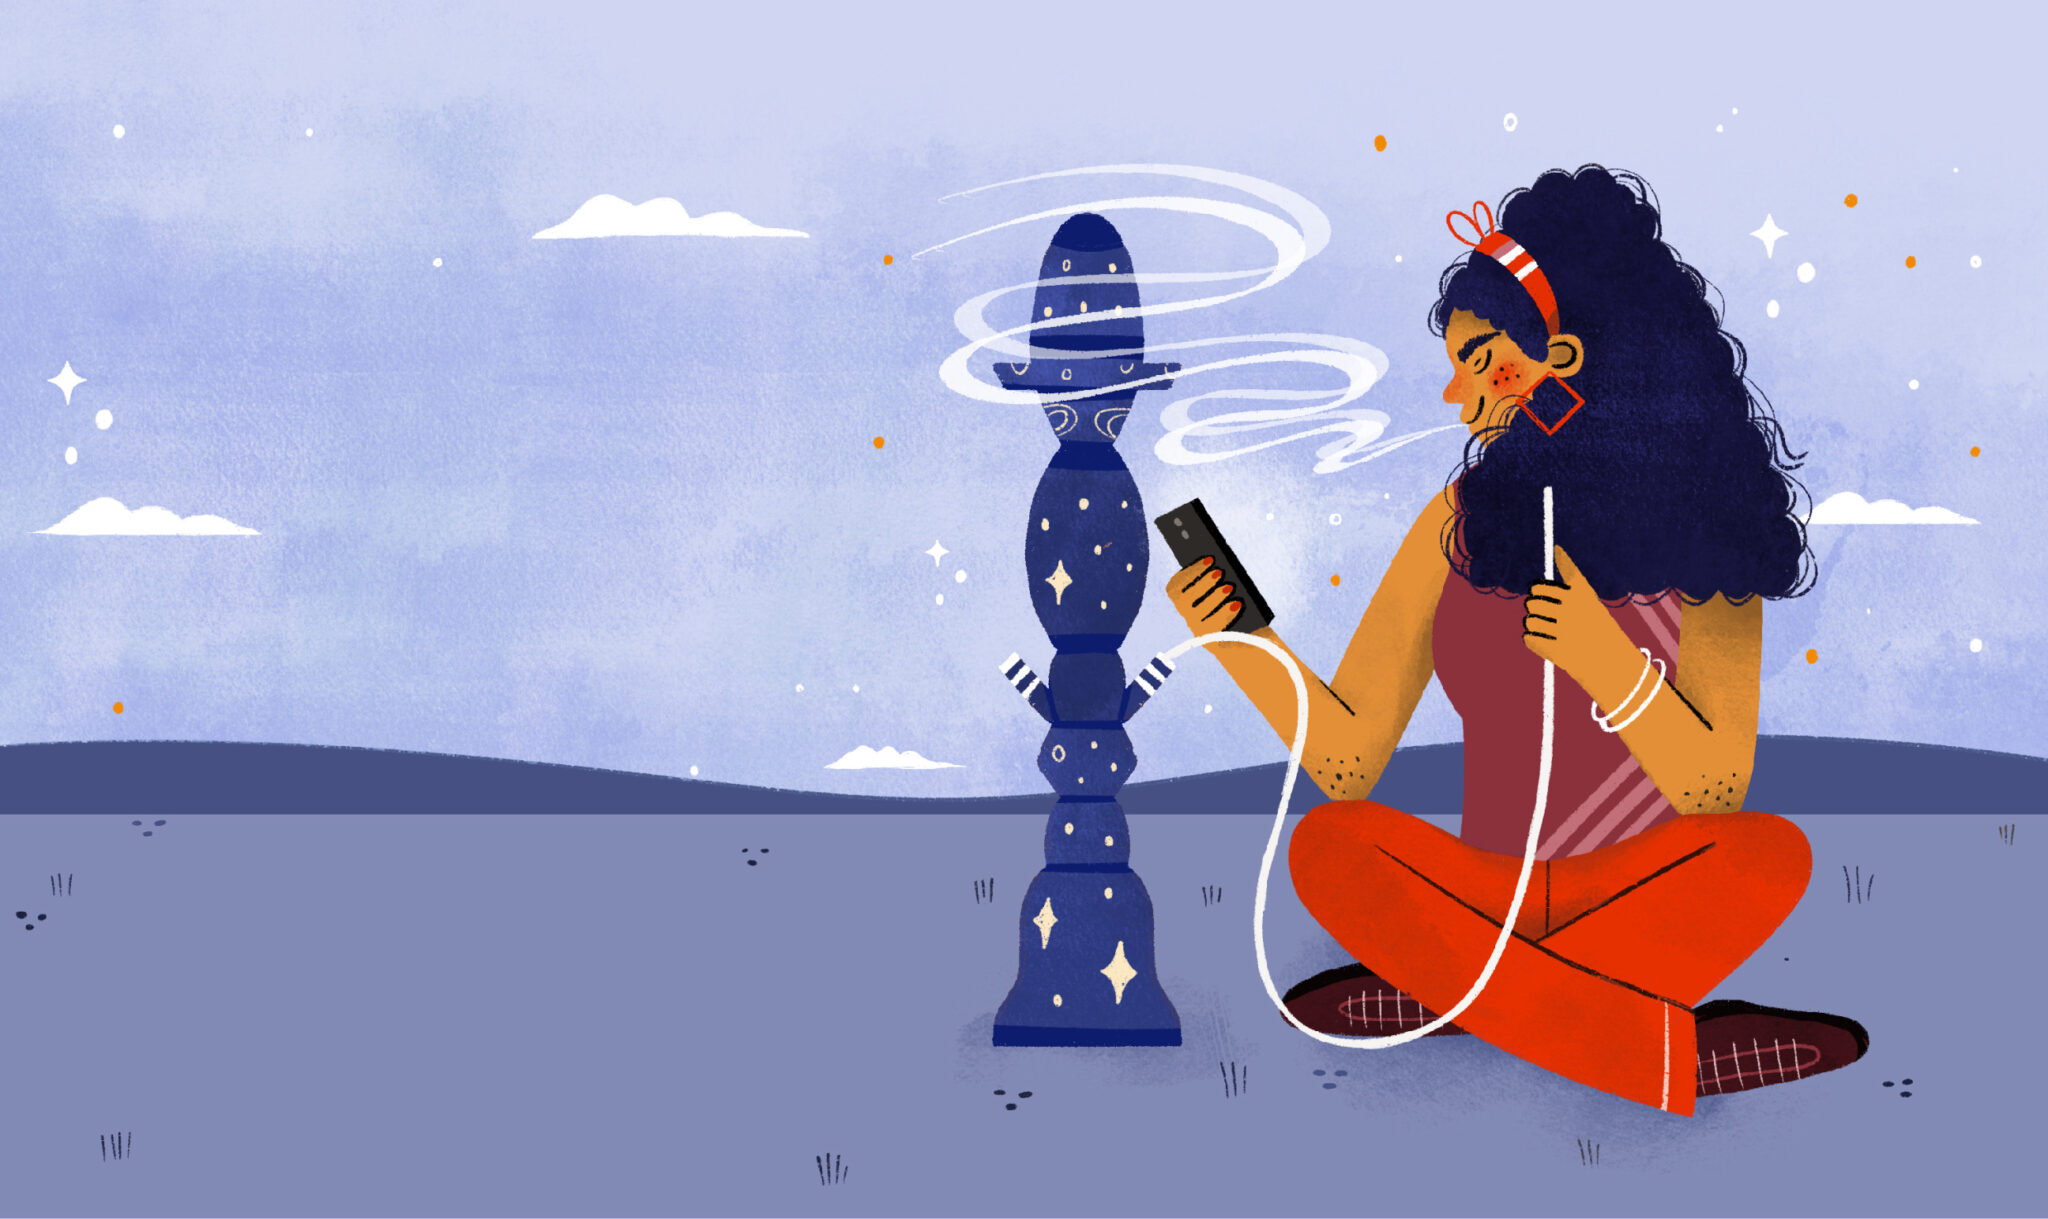 70s vibe illustration of a young woman smoking hookah in outdoors.